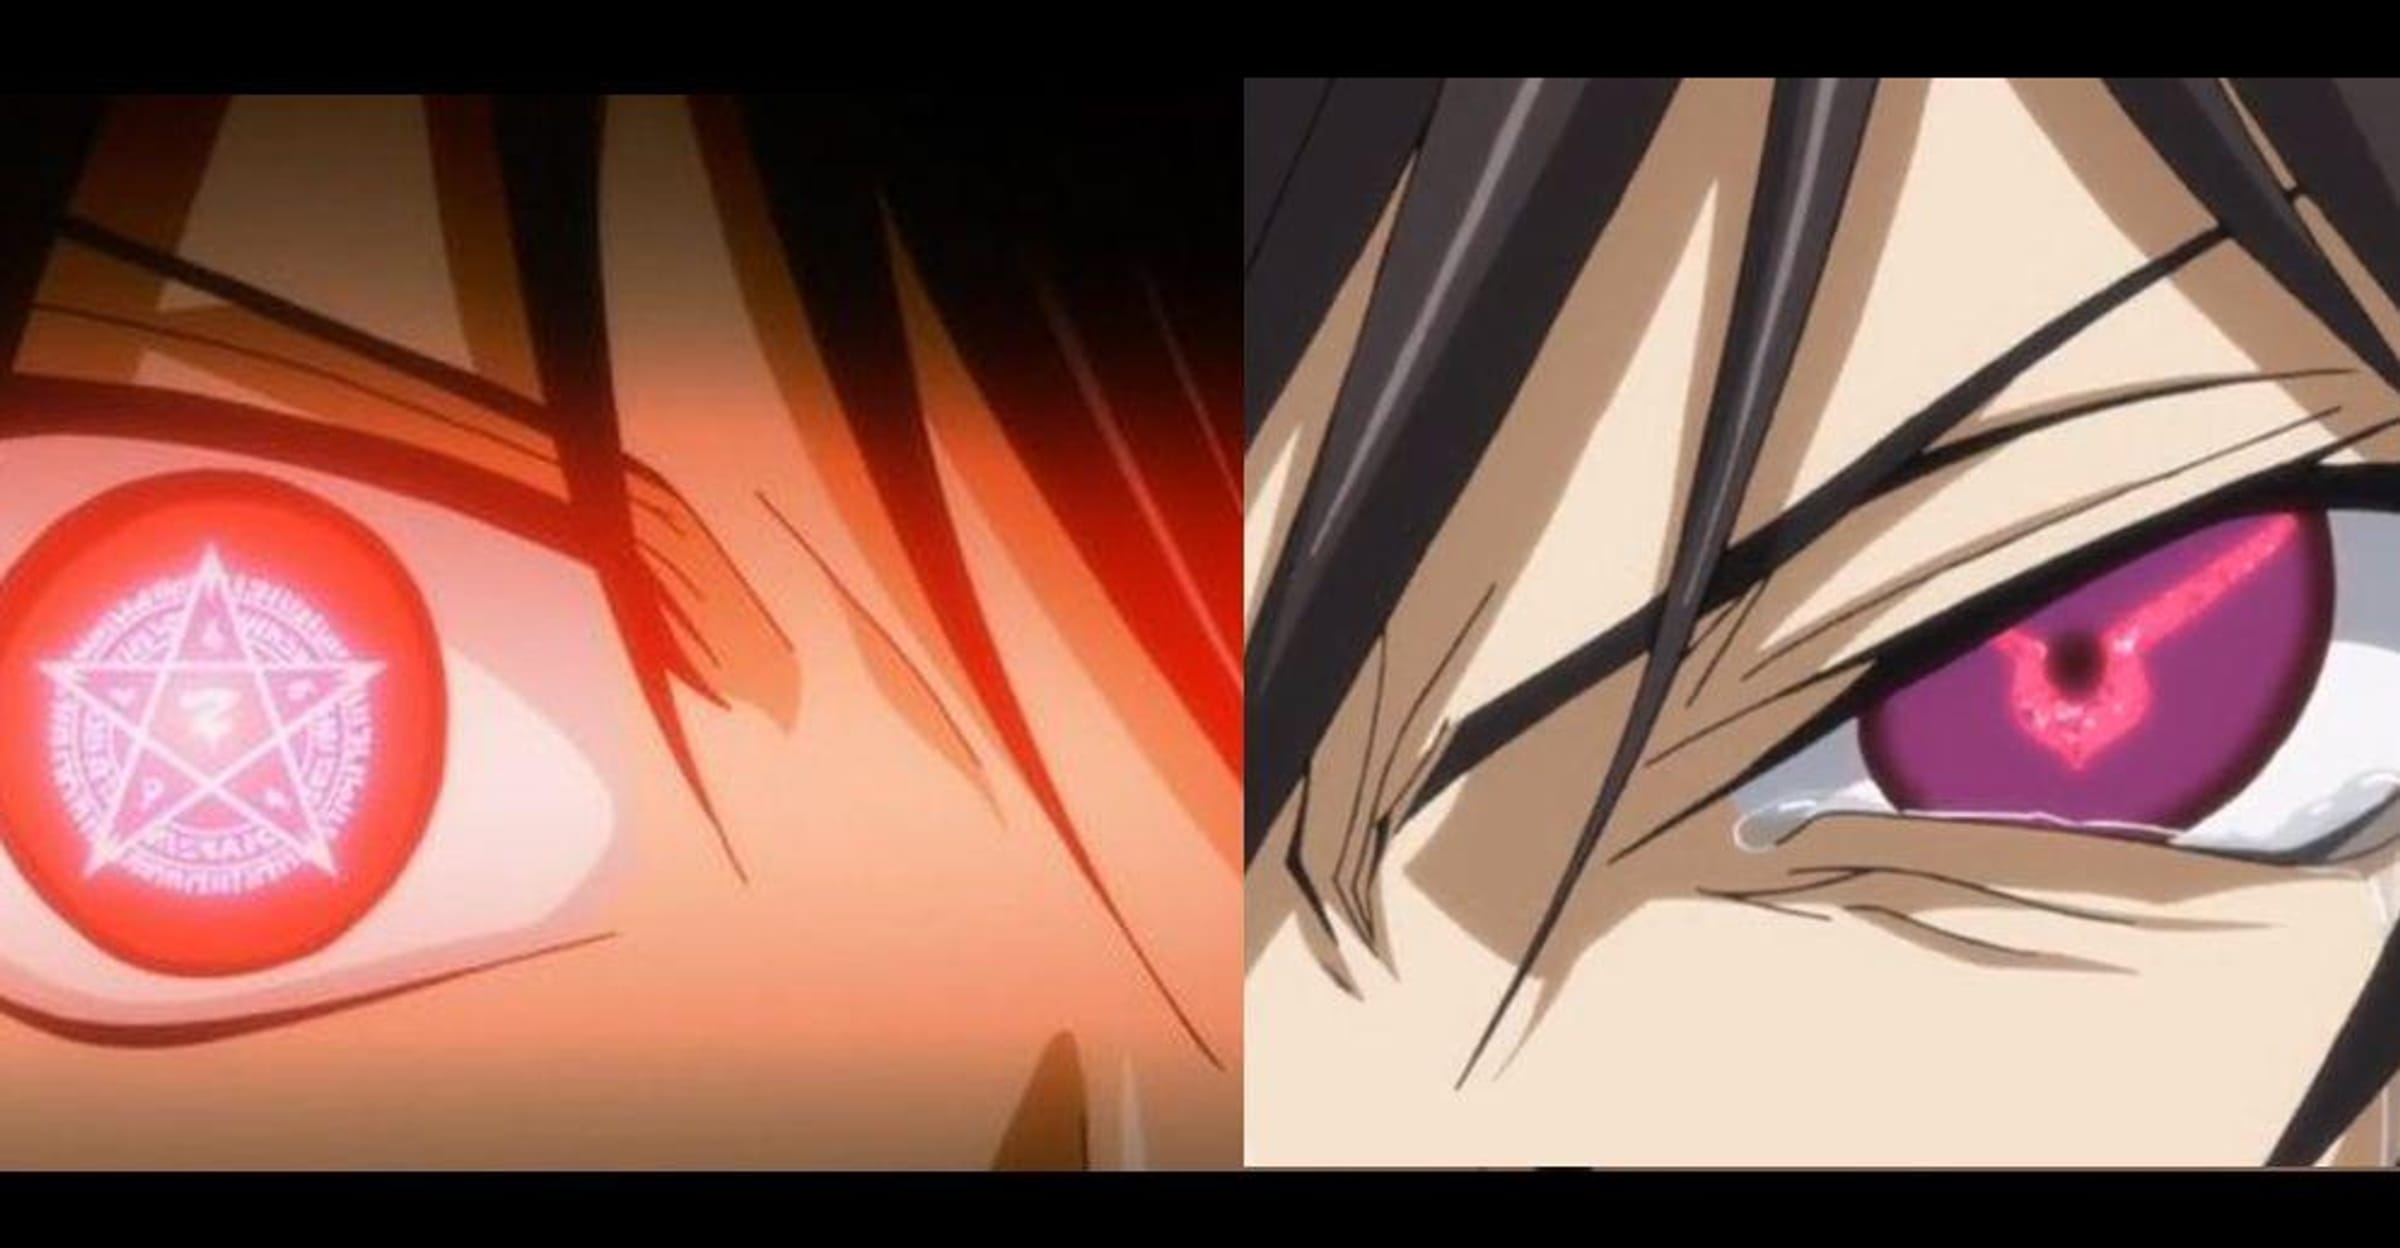 Different eyes on each anime characters power